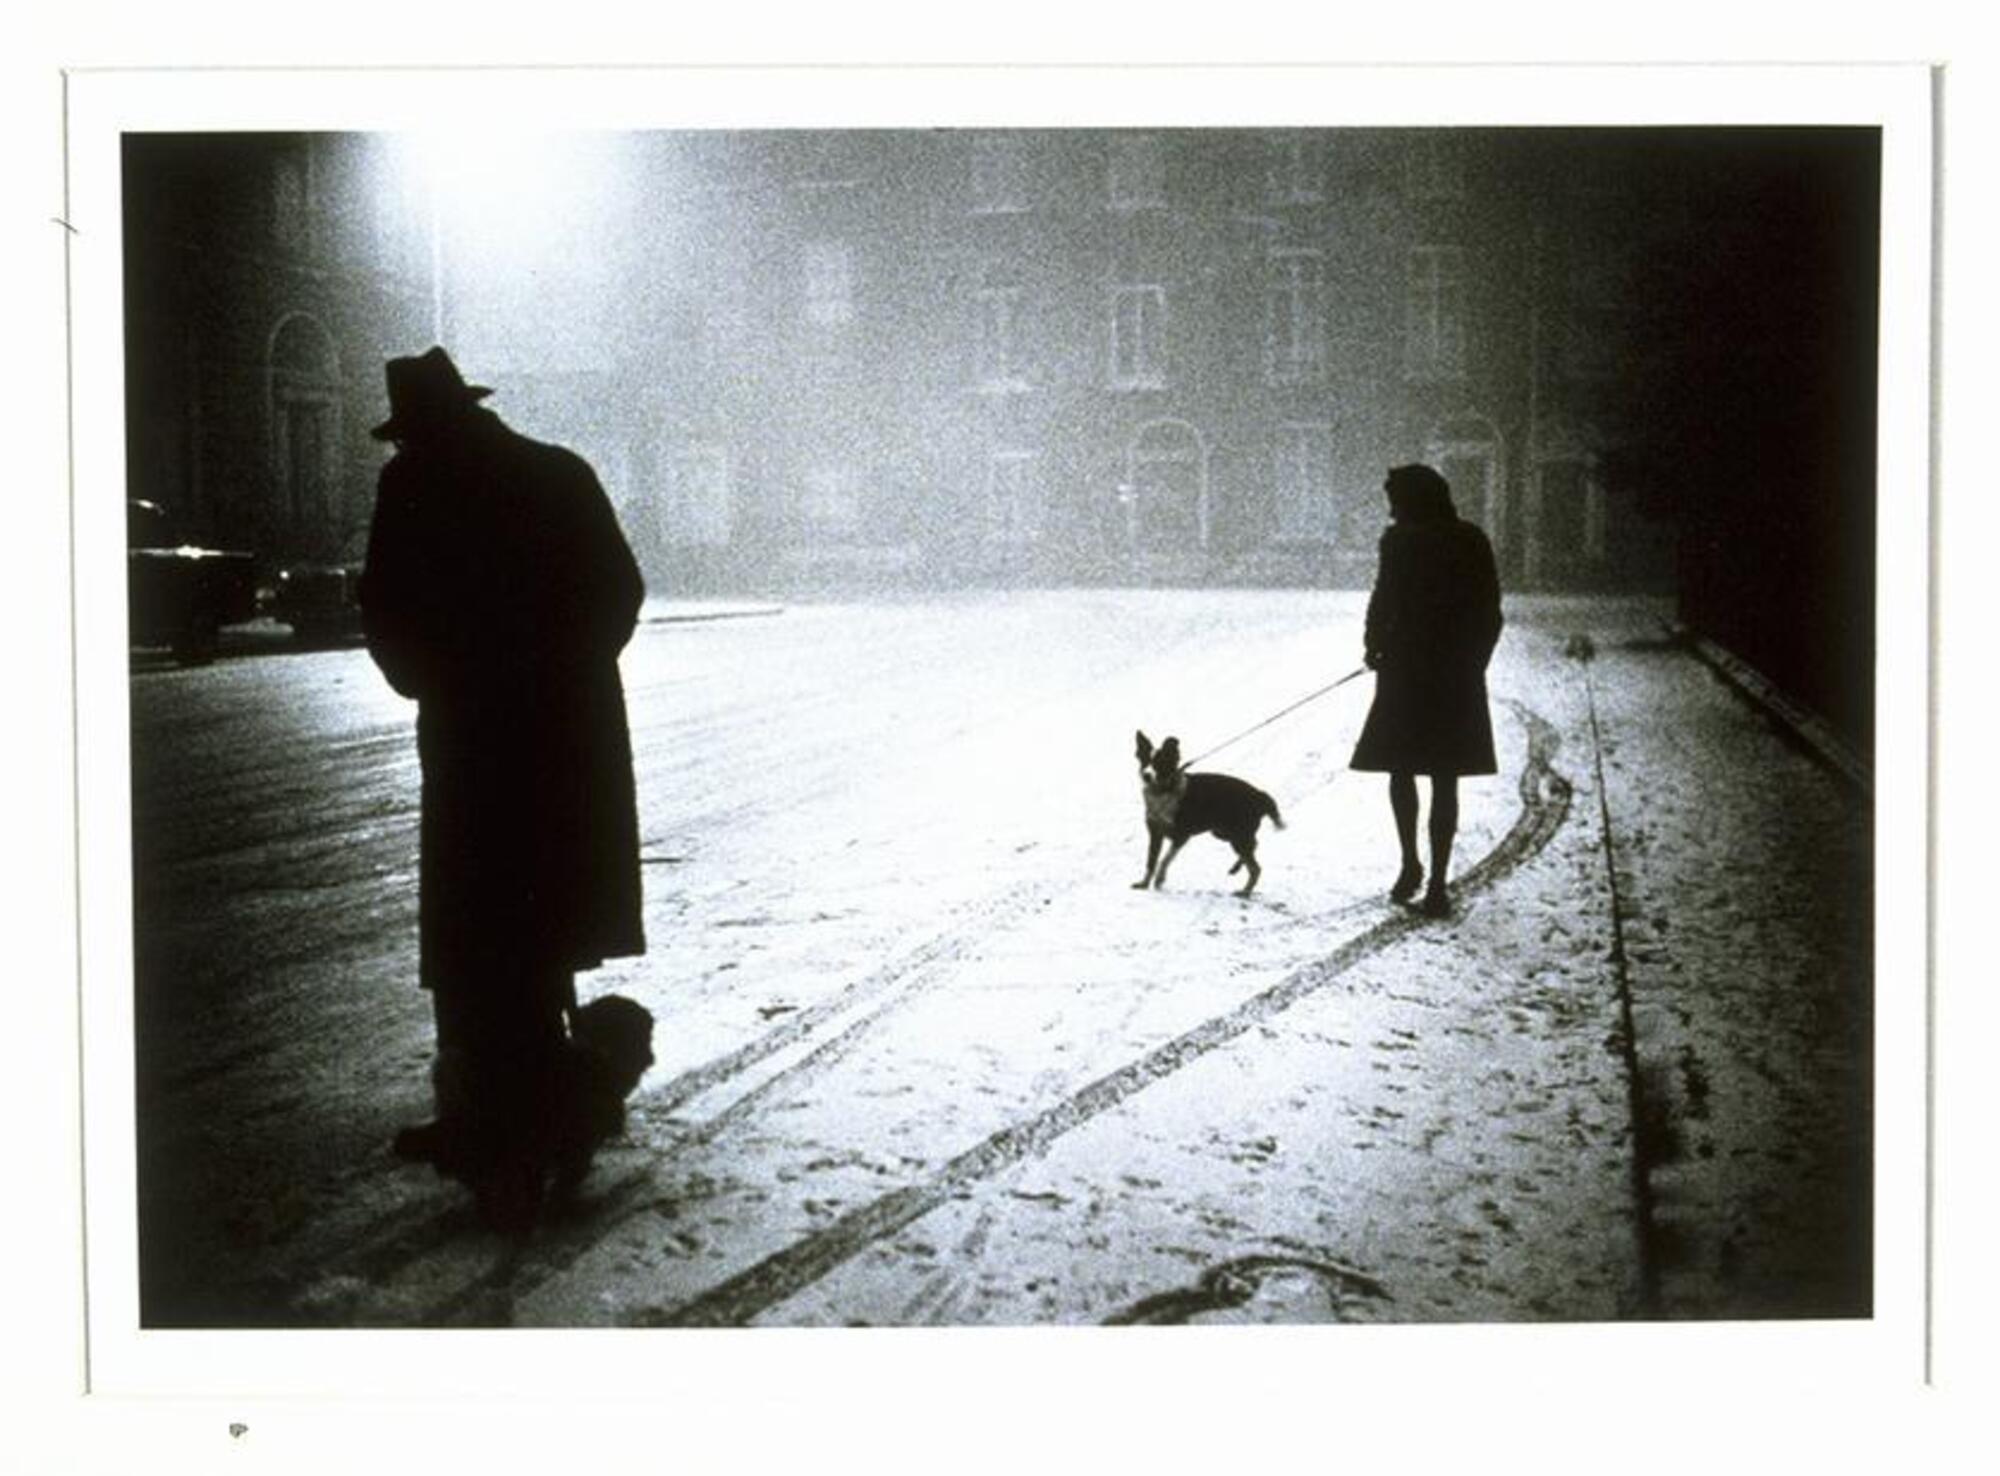 This photograph depicts a view of a snowy street at night.  Meandering in opposites directions, a man and woman are walking their dogs.